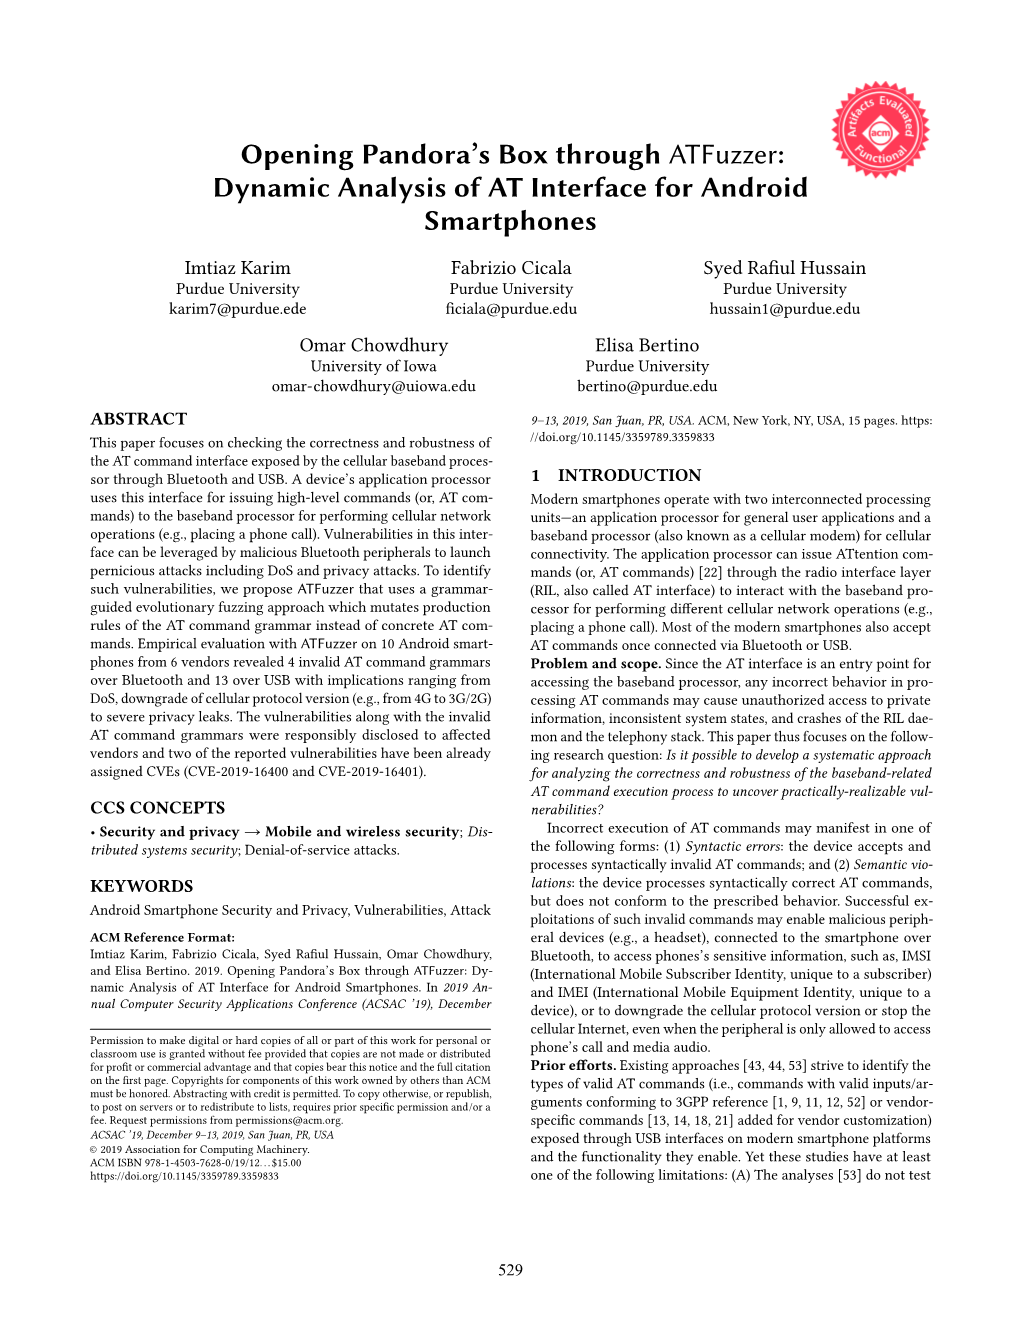 Dynamic Analysis of at Interface for Android Smartphones